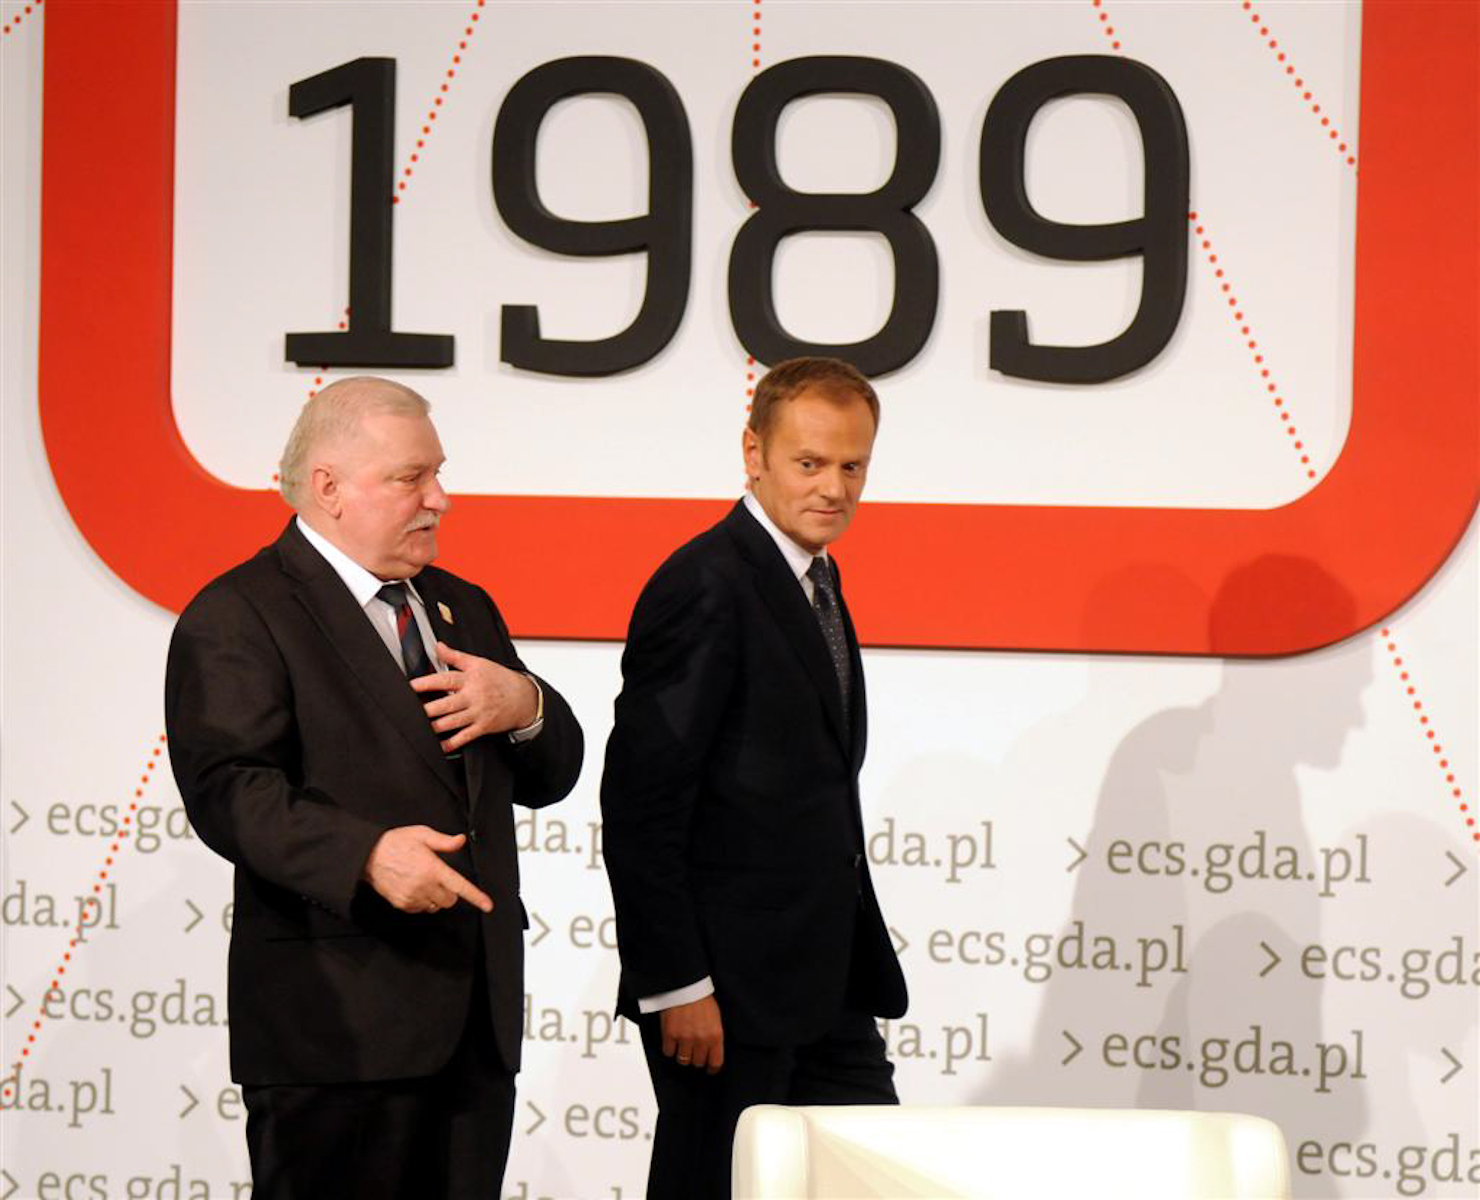 Former President of Poland Lech Walesa and Prime Minister Donald Tusk during international conference “Solidarity and The Fall of Communism” in Gdansk.